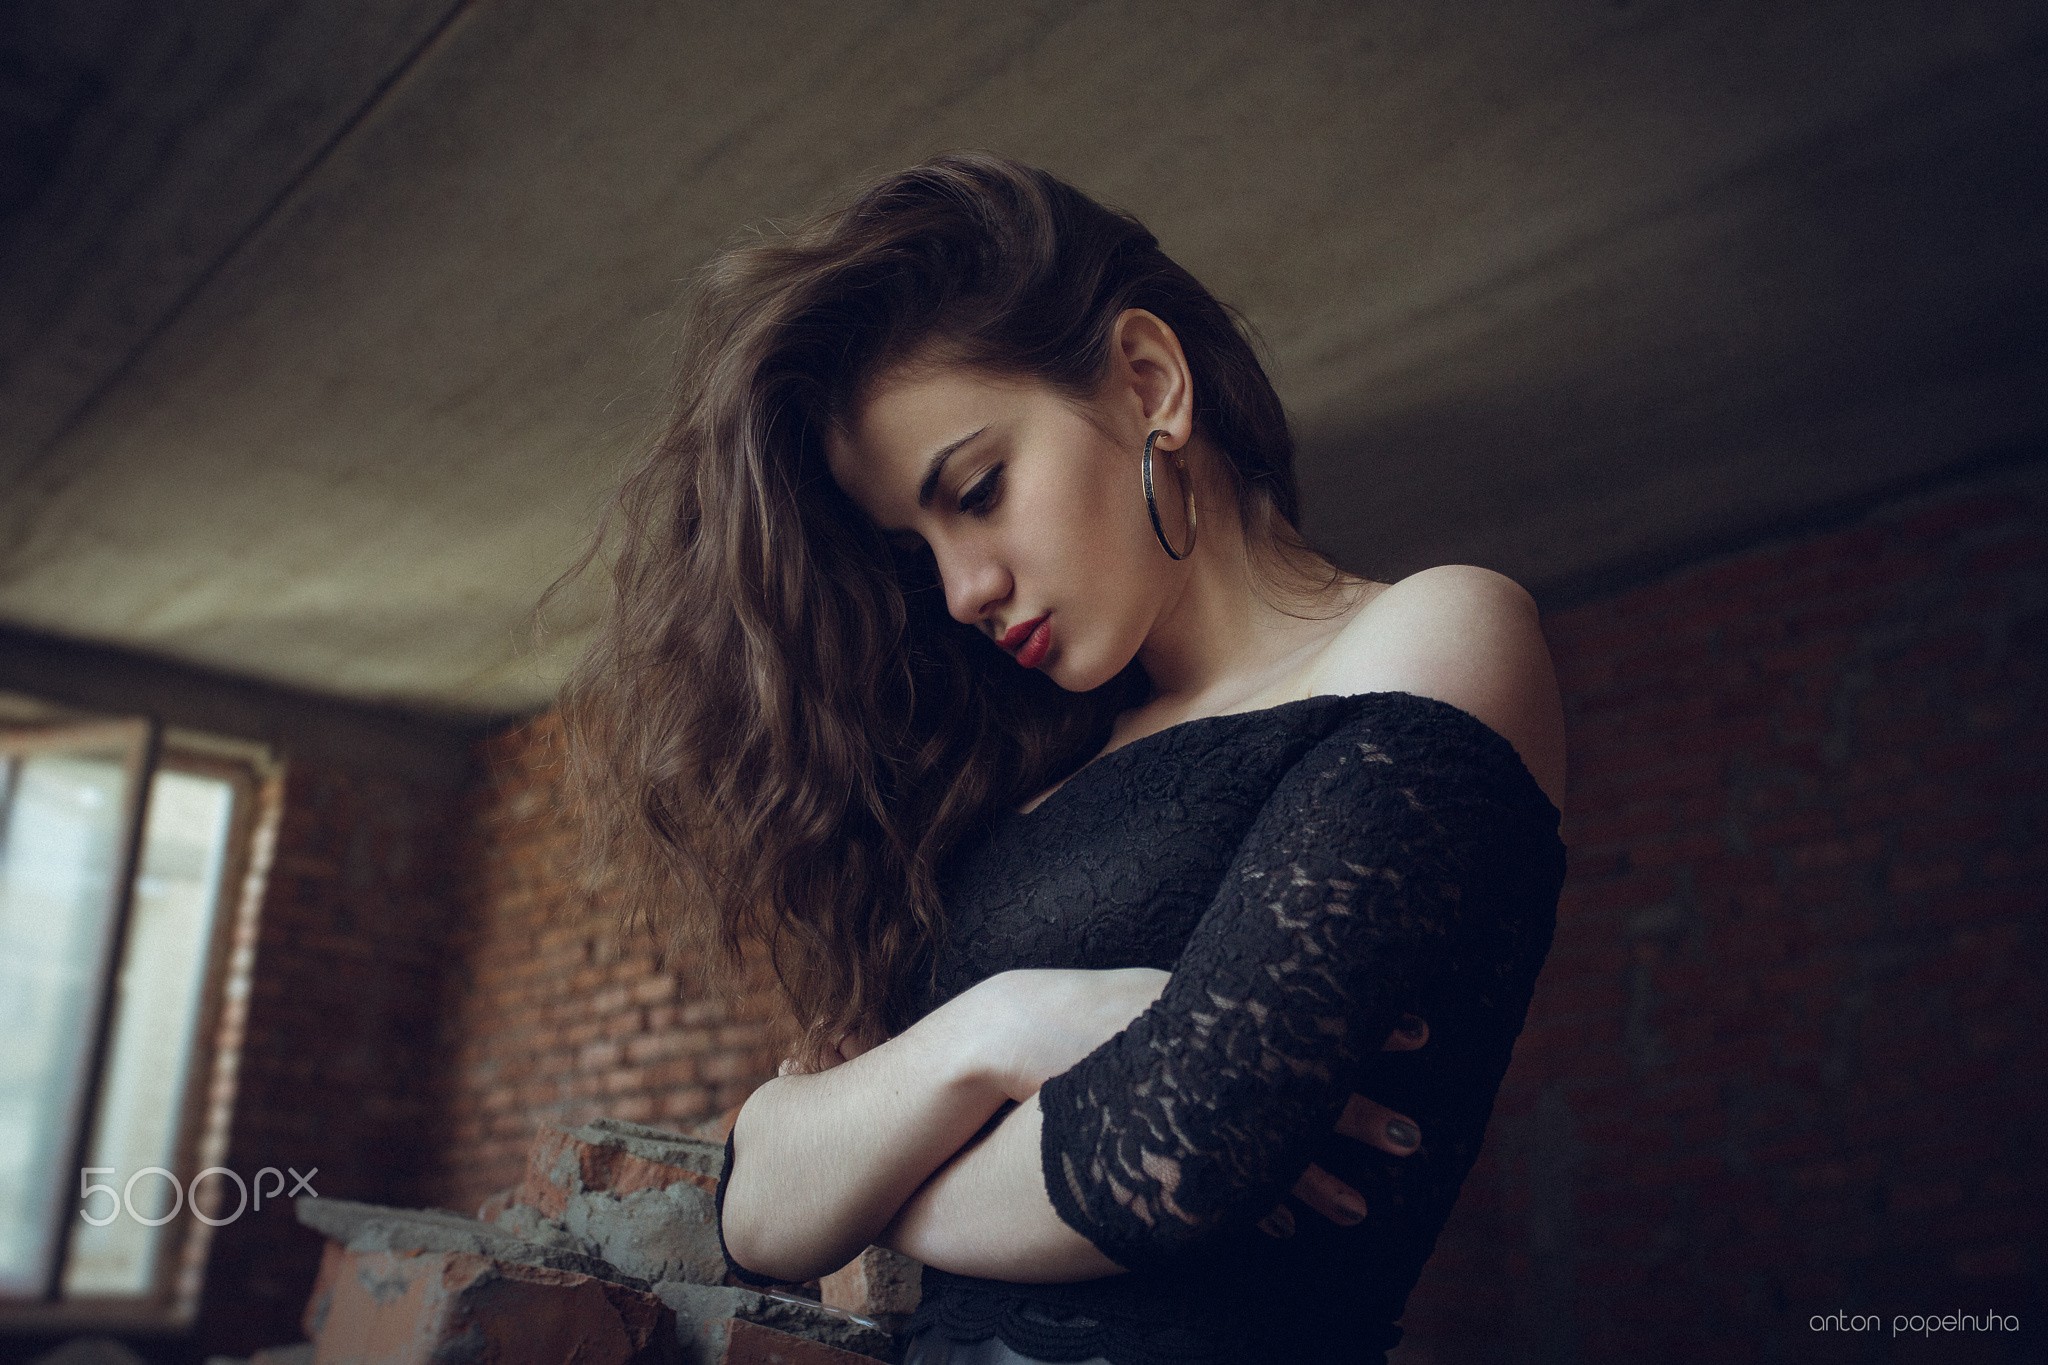 People 2048x1365 women brunette red lipstick looking away black clothing face bare shoulders no bra Anton Popelnuha 500px watermarked arms crossed lipstick makeup painted nails women indoors indoors model